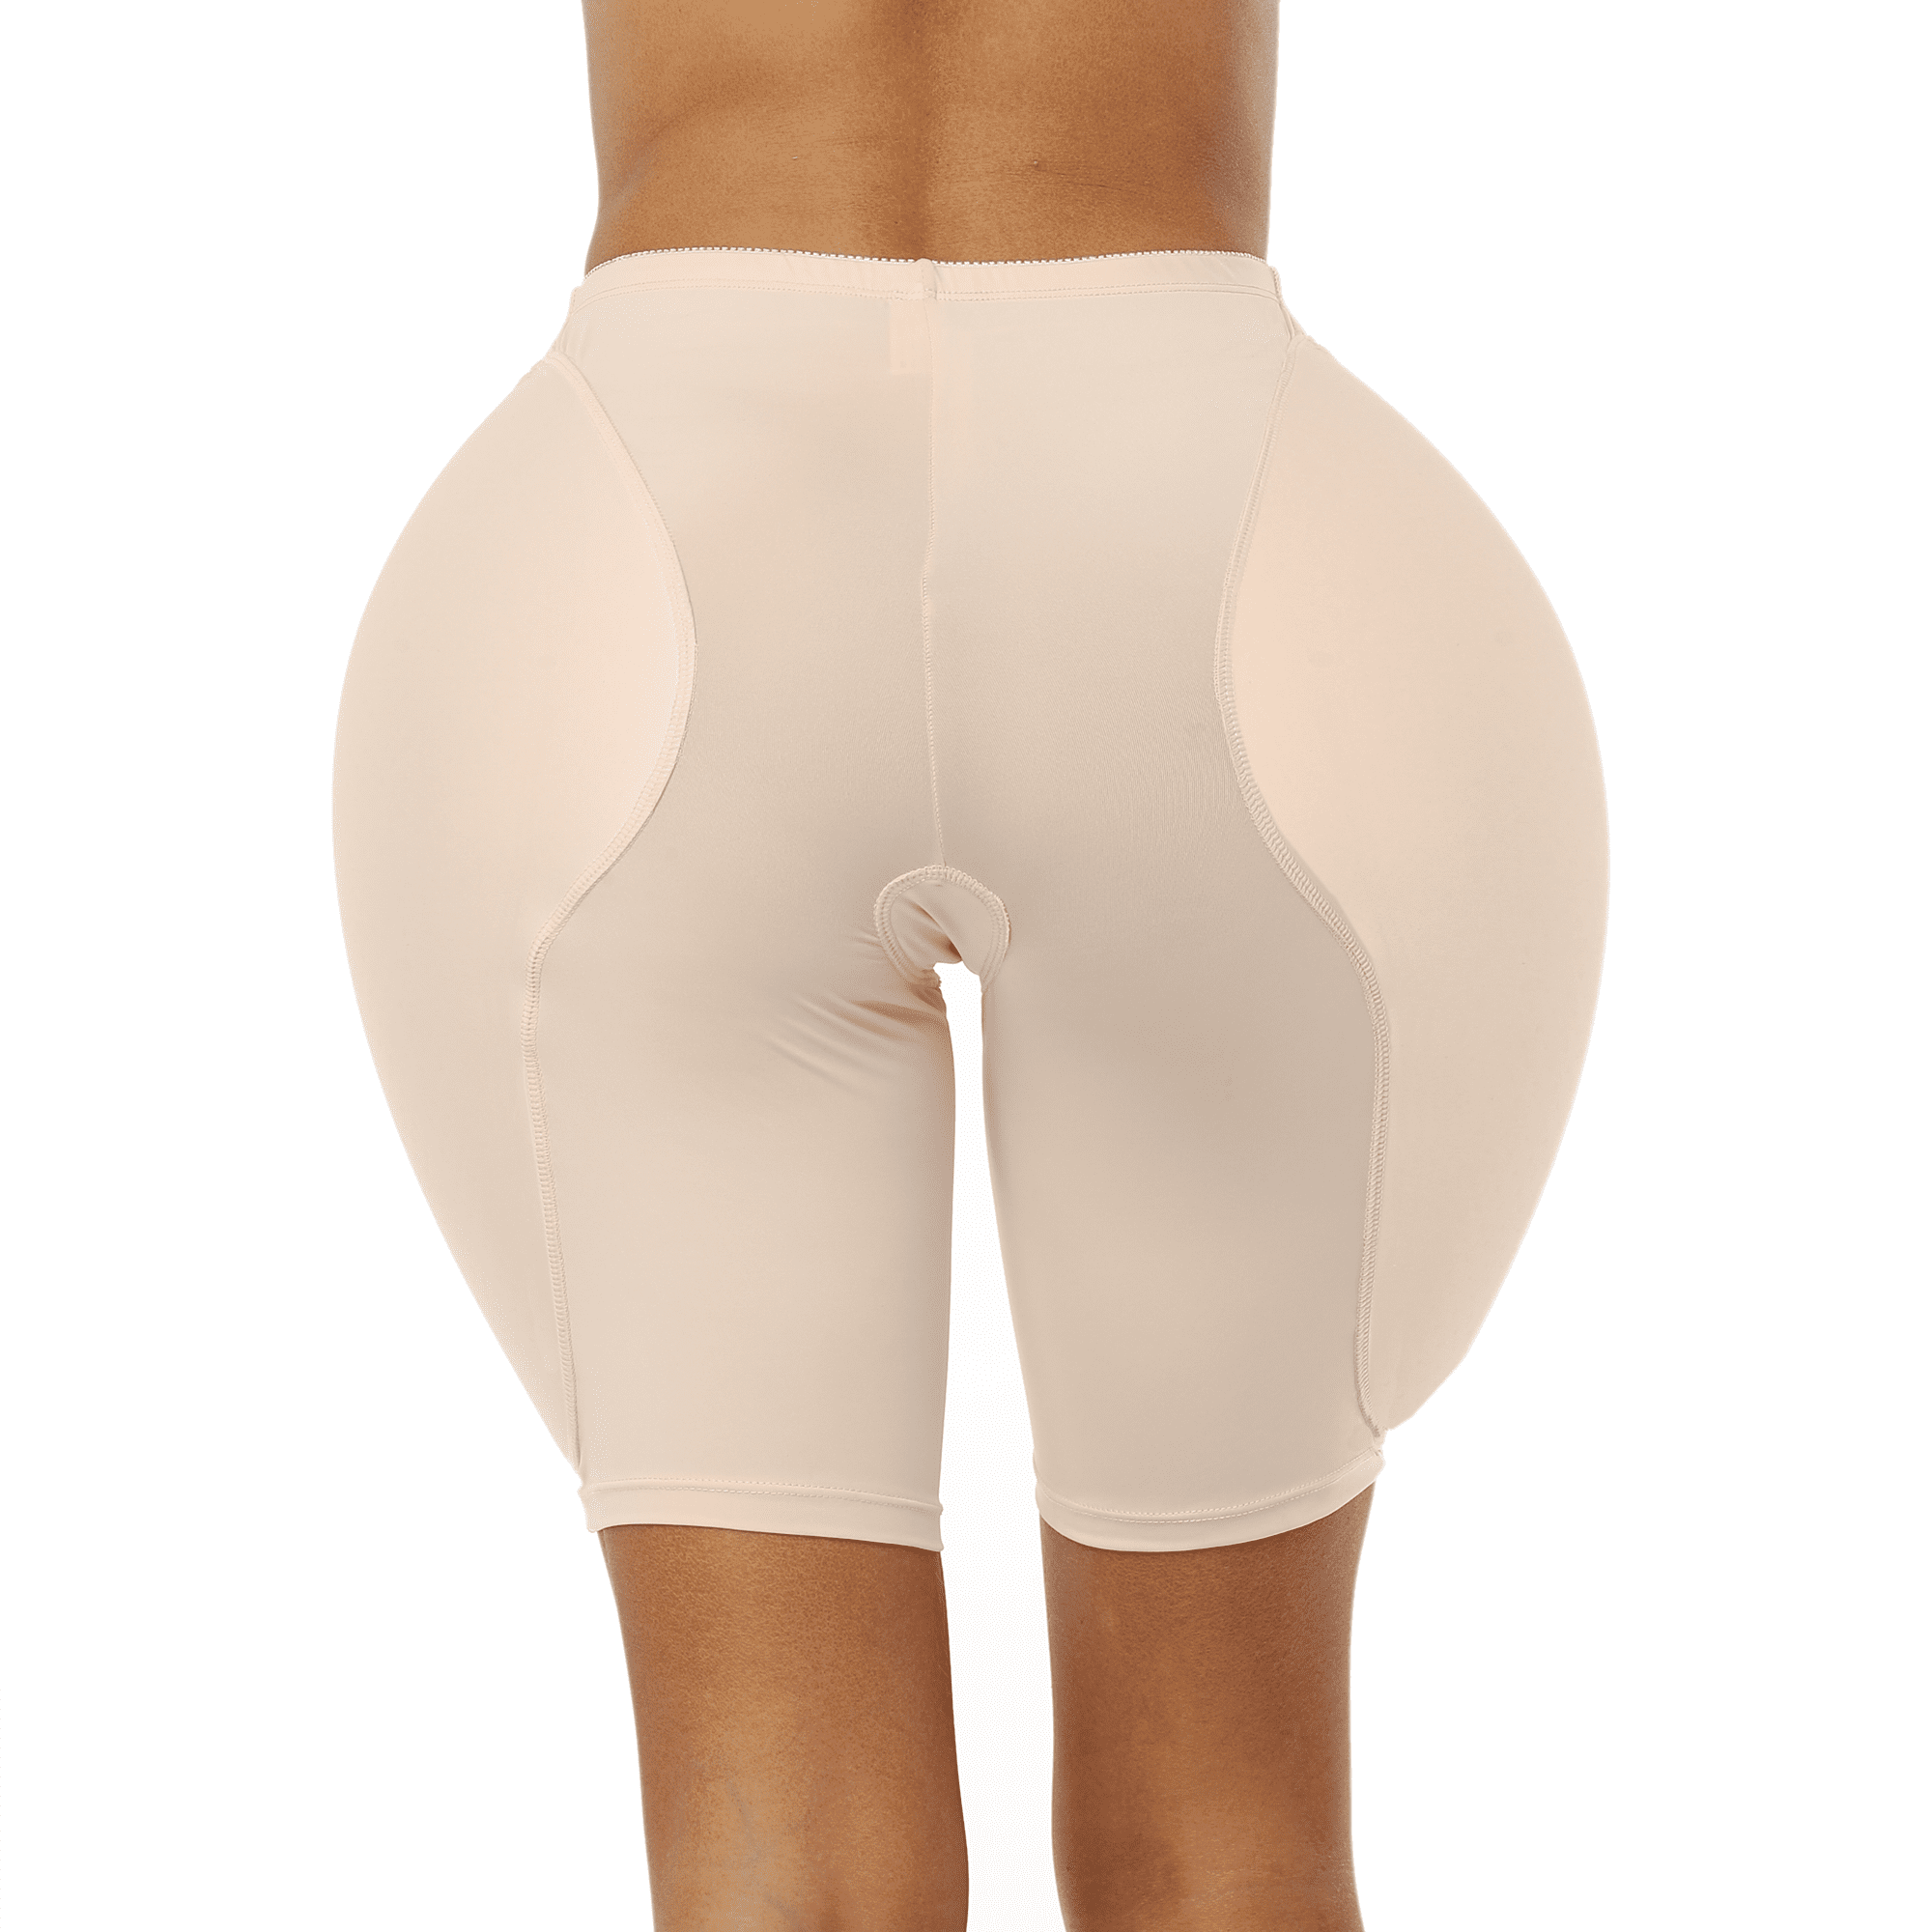 Foreign Women Body Shaper Padded Butt Hip Lifter Shorts in Central Business  District - Clothing Accessories, Ayo Opeyemi